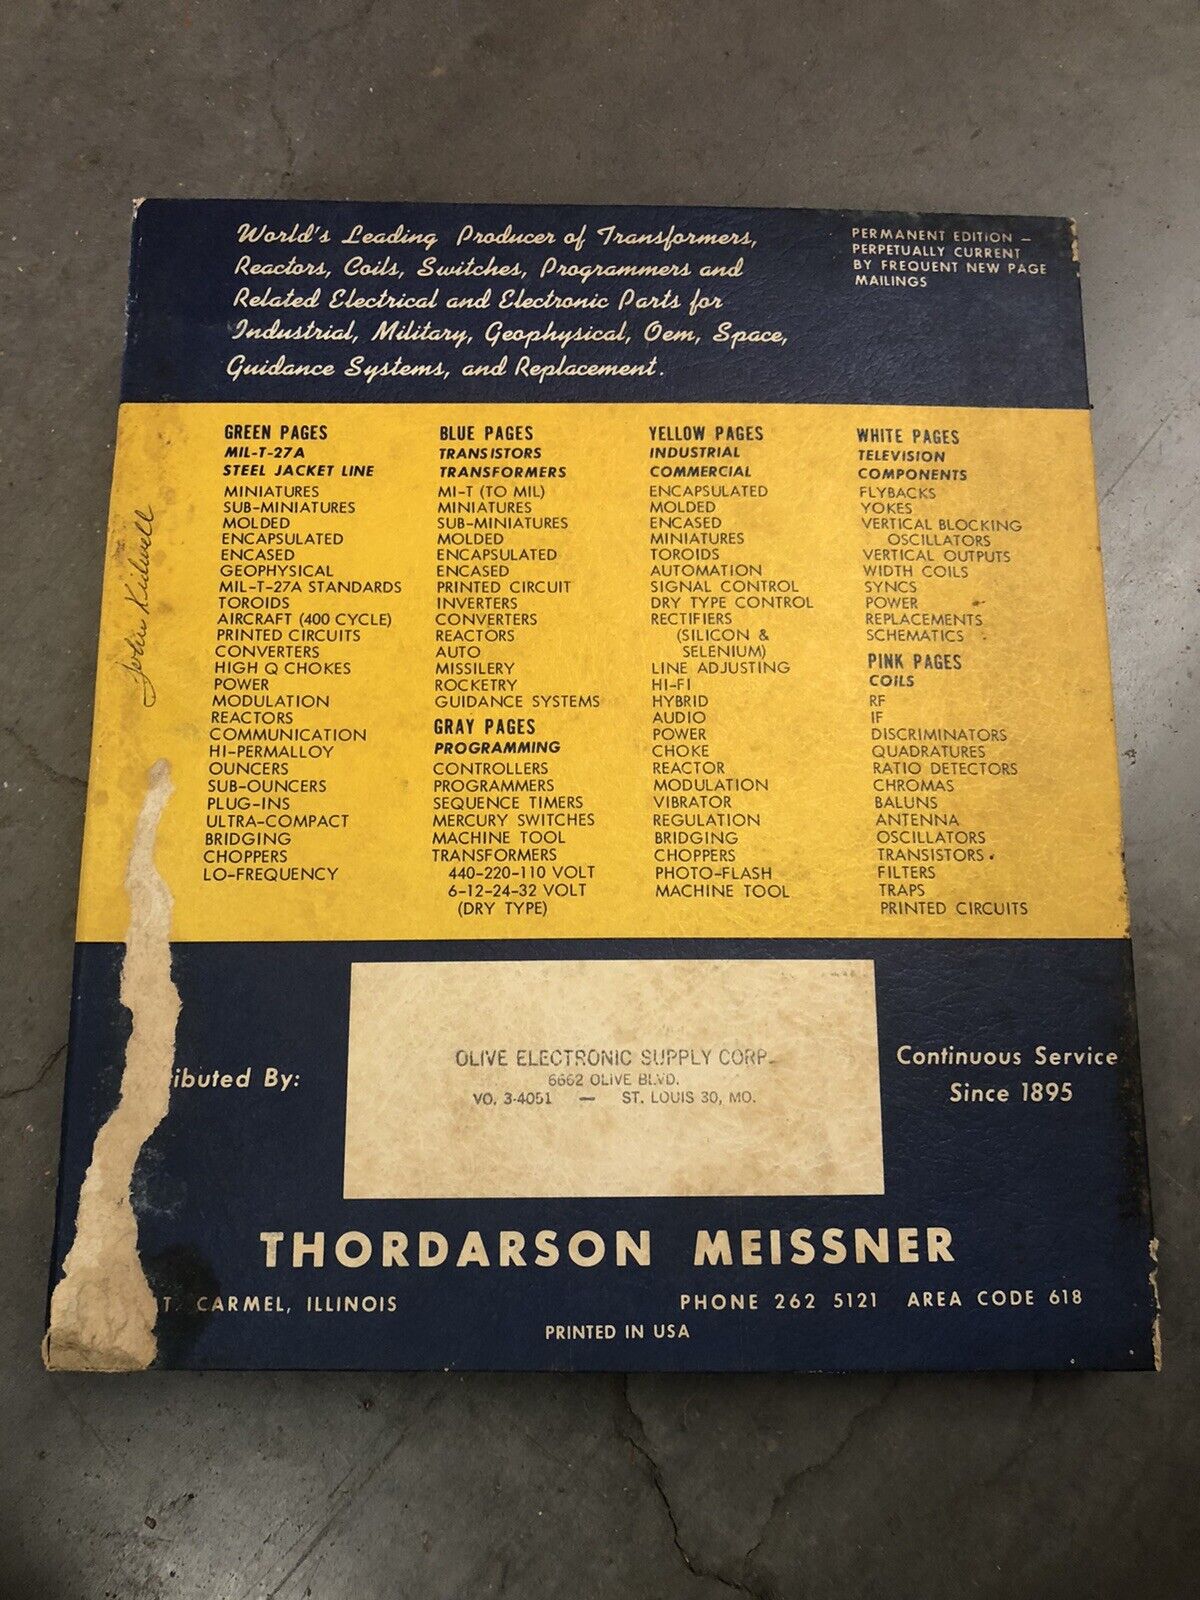 Thordarson Meissner Permanent Catalog And Replacement Guide (1950’s)